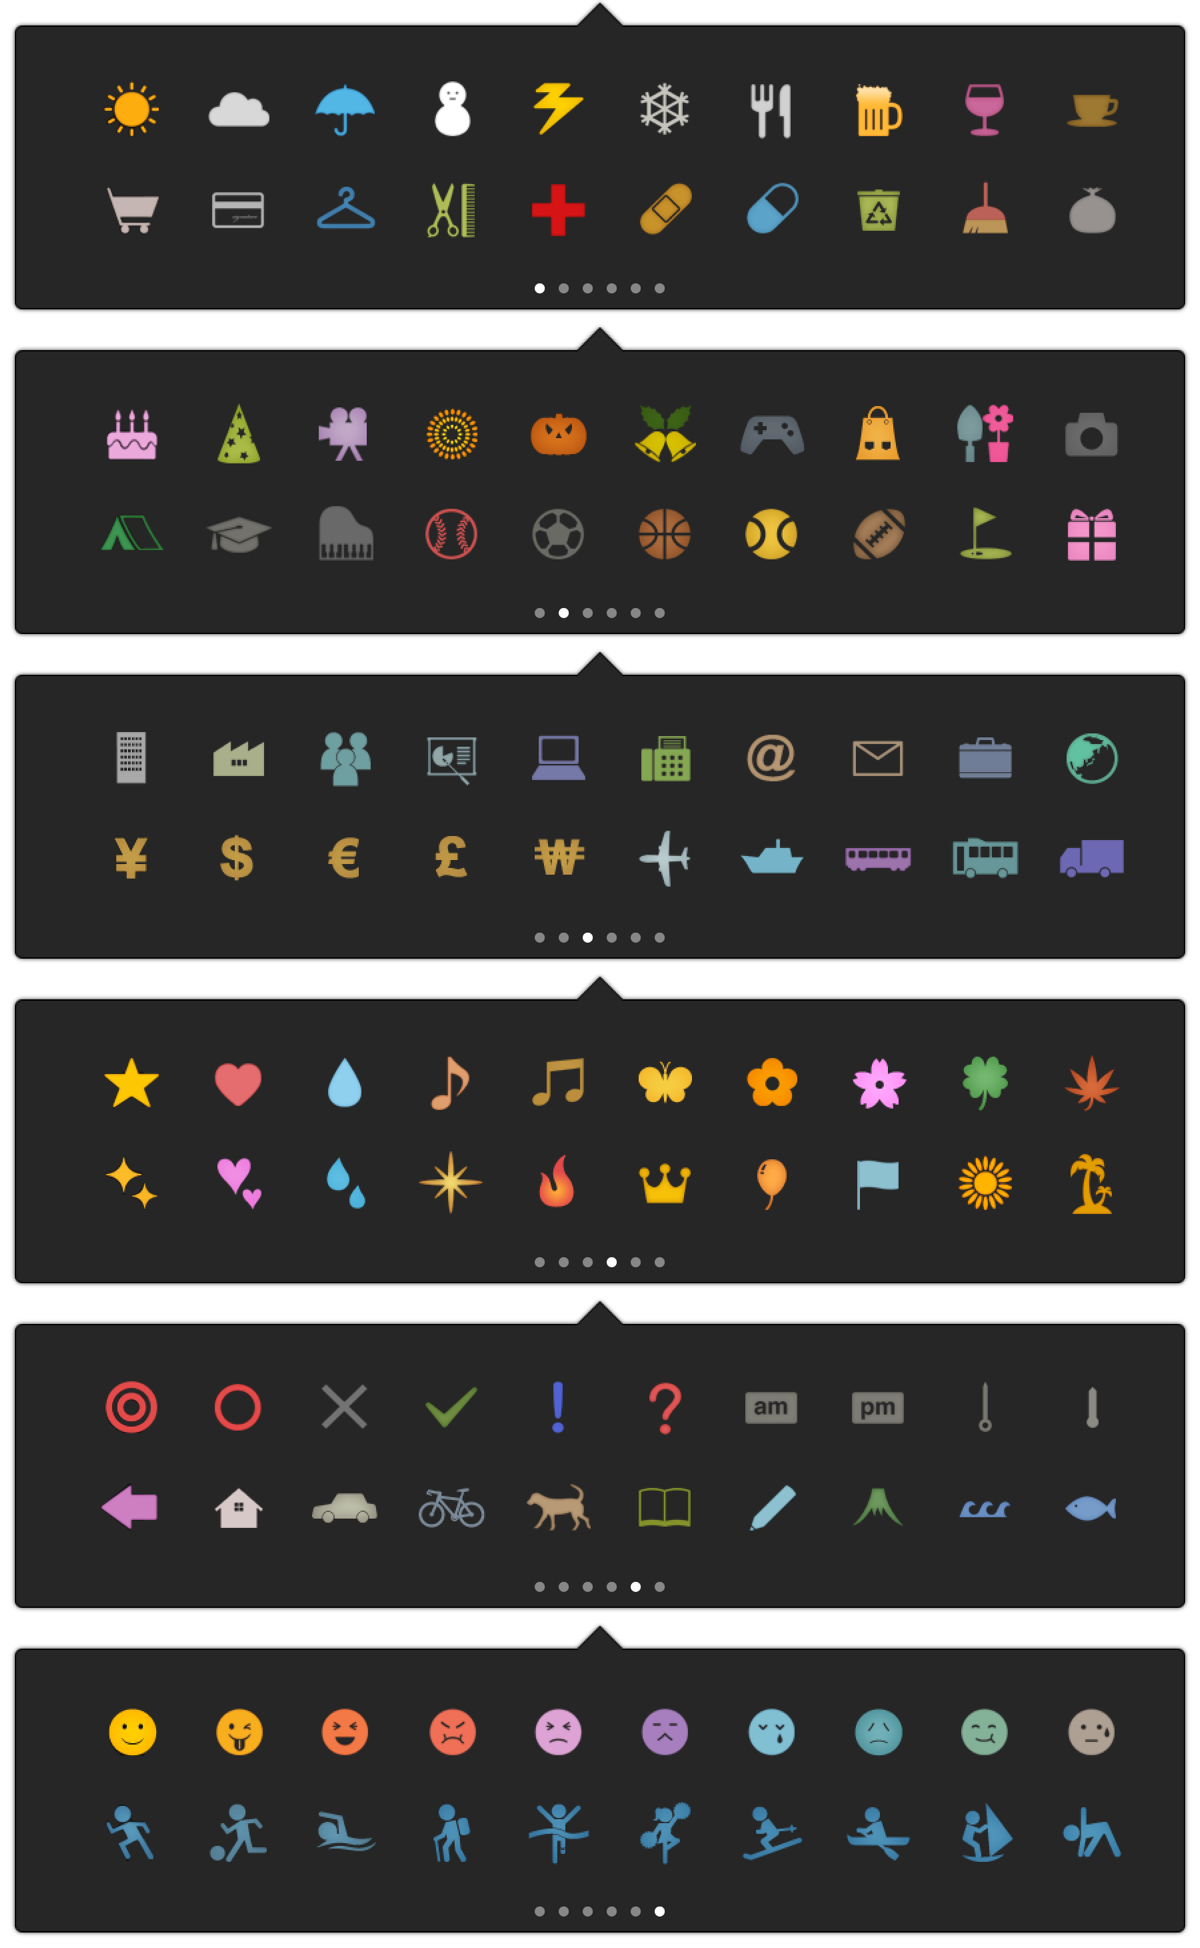 All Icons